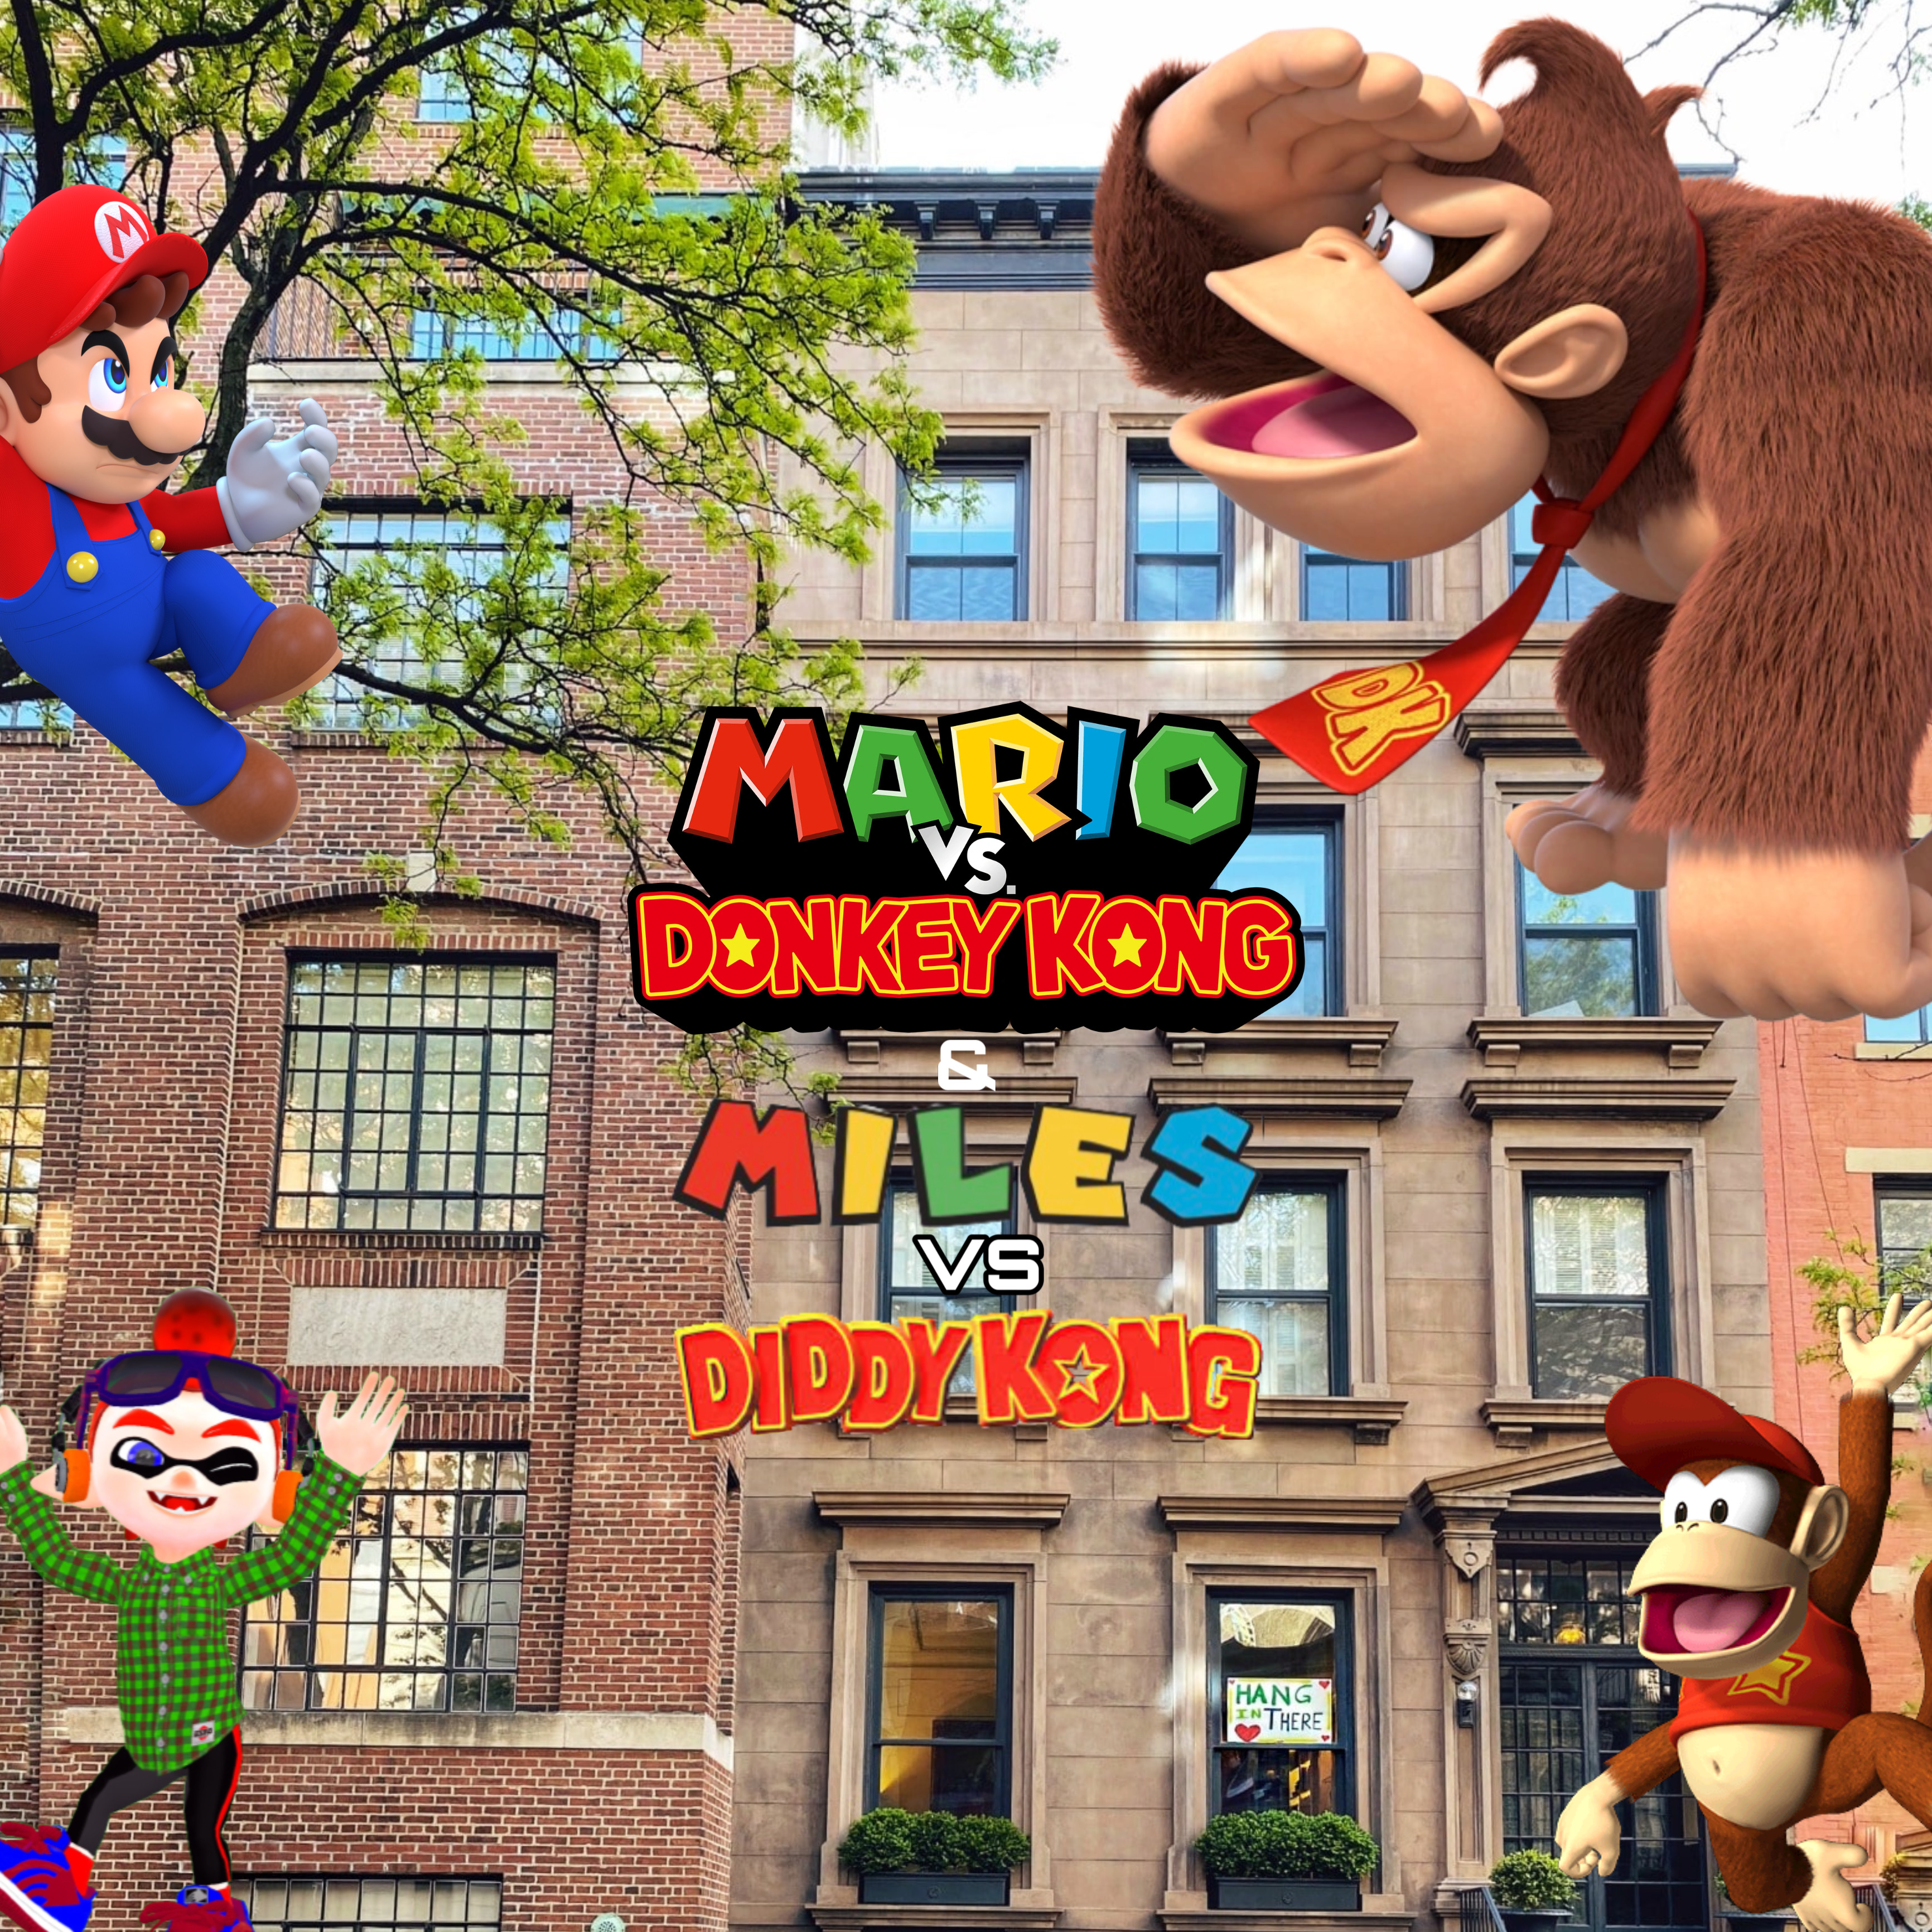 Mario vs Donkey Kong Remake is here by Marielx6 on DeviantArt